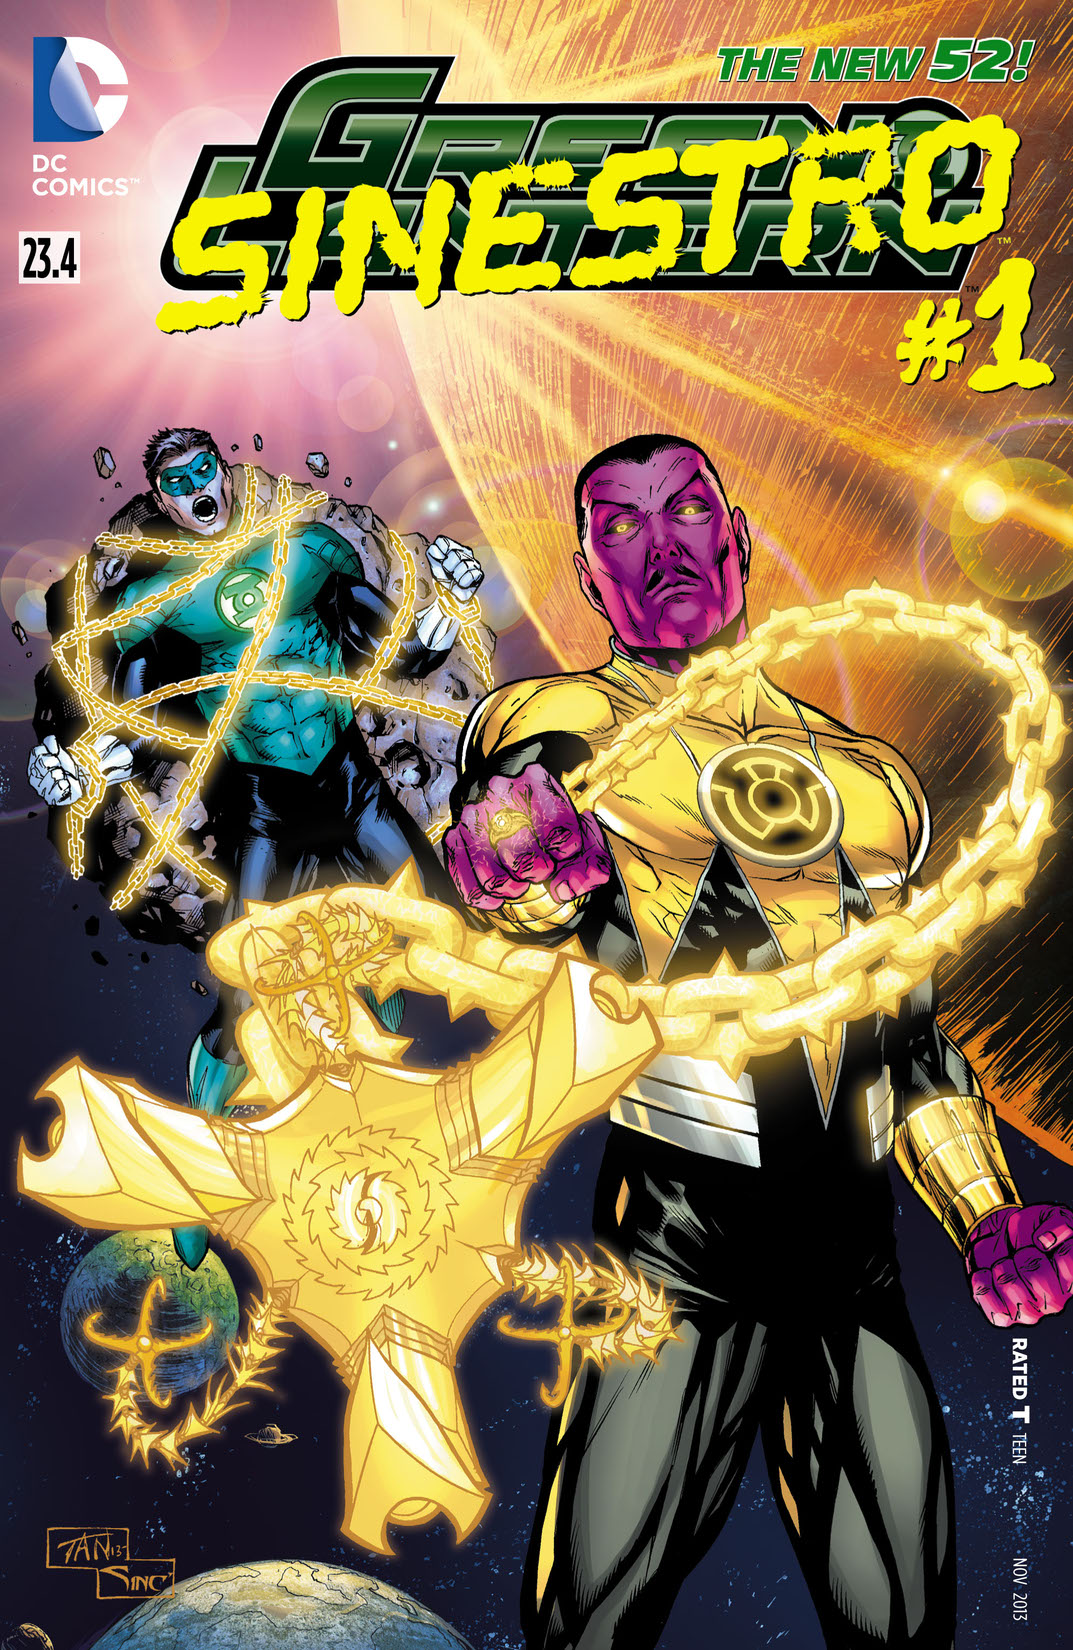 Green Lantern feat Sinestro (2013-) #23.4 preview images